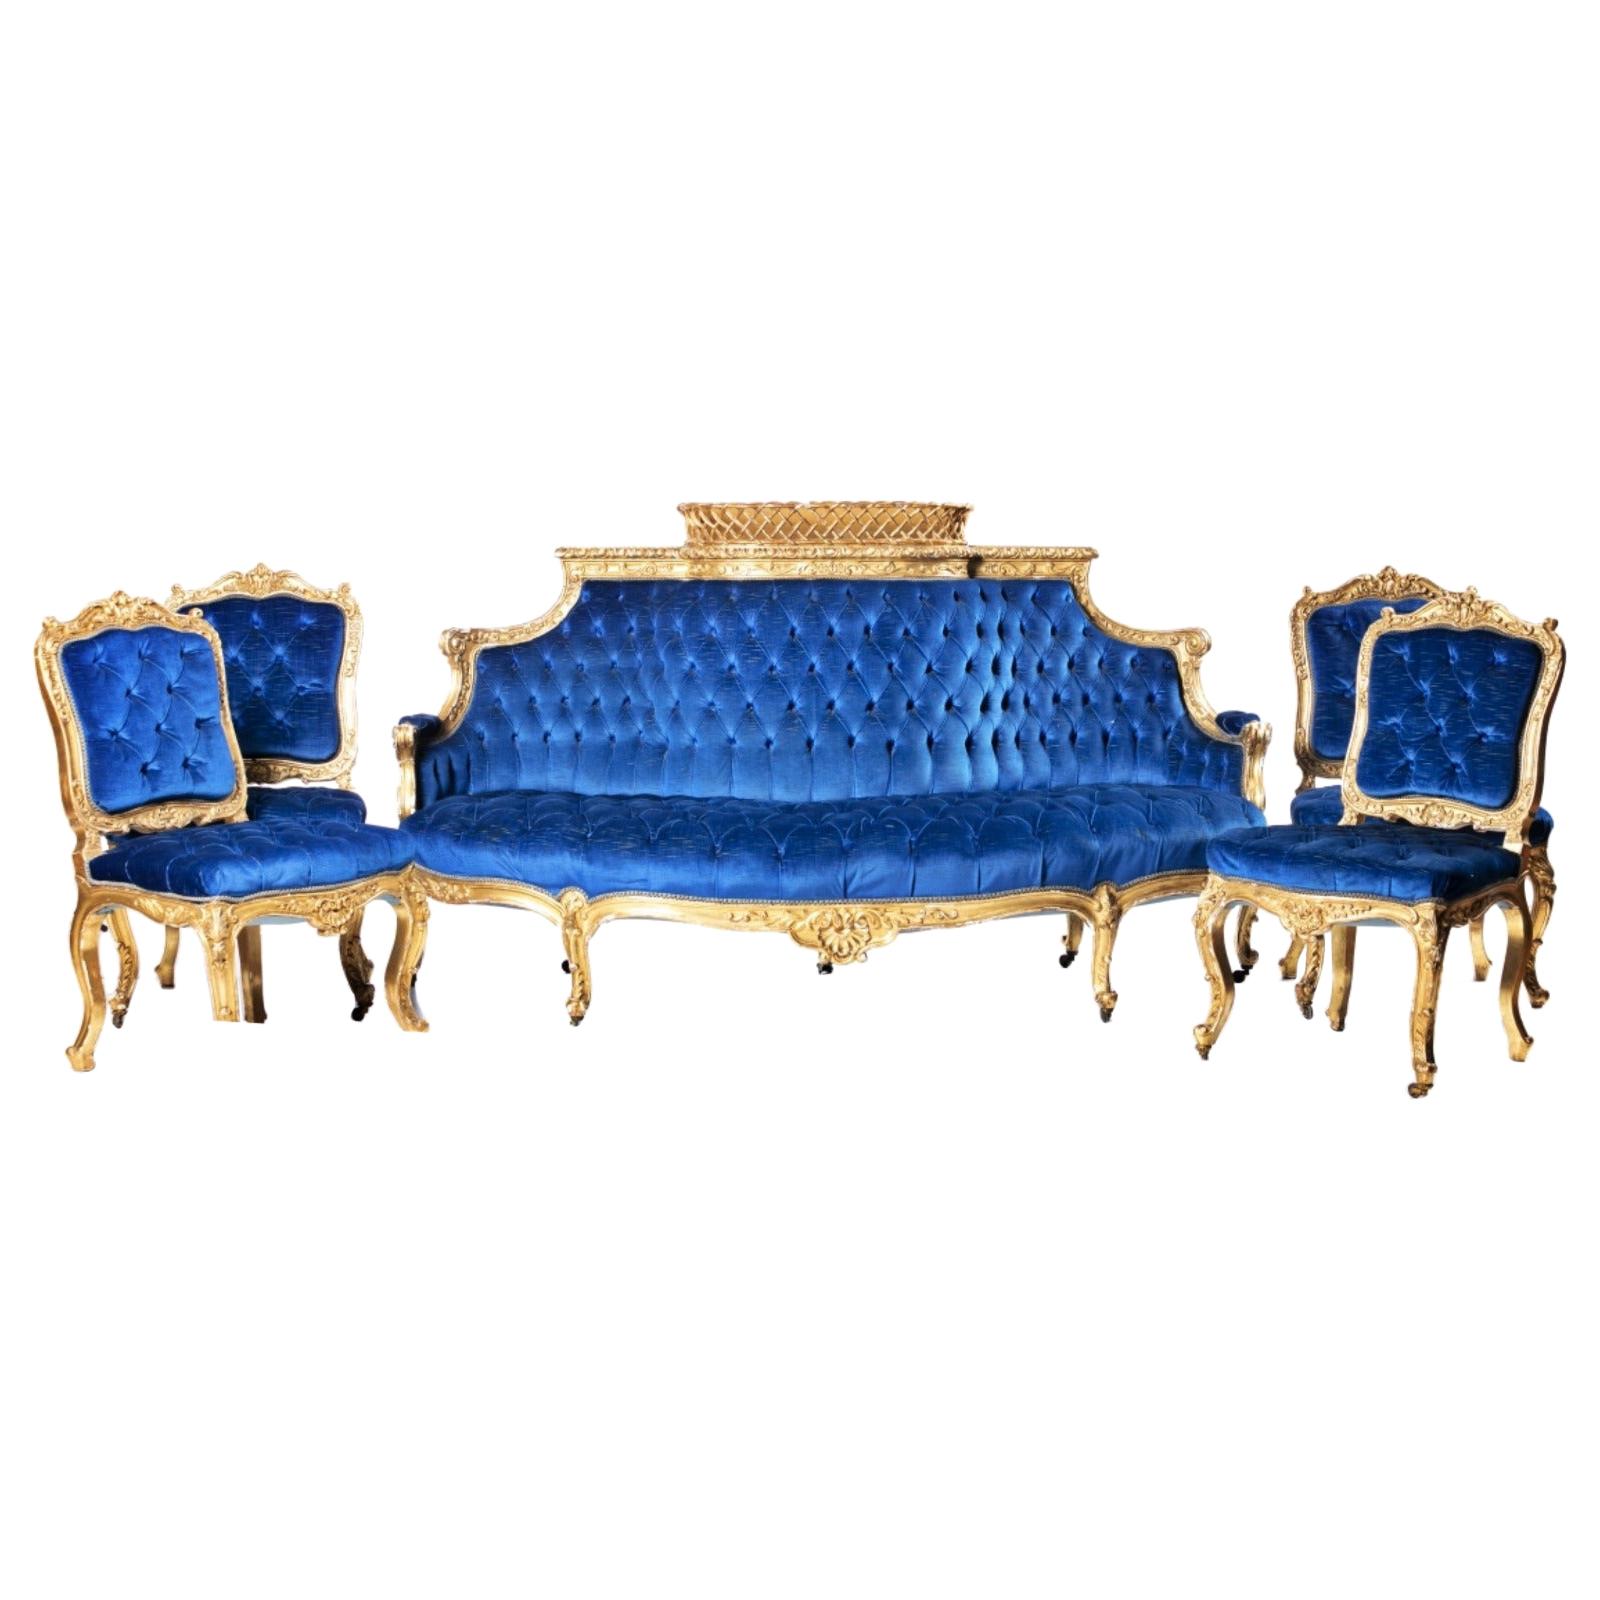 Set of French Sofa and 4 Chairs, 19th Century